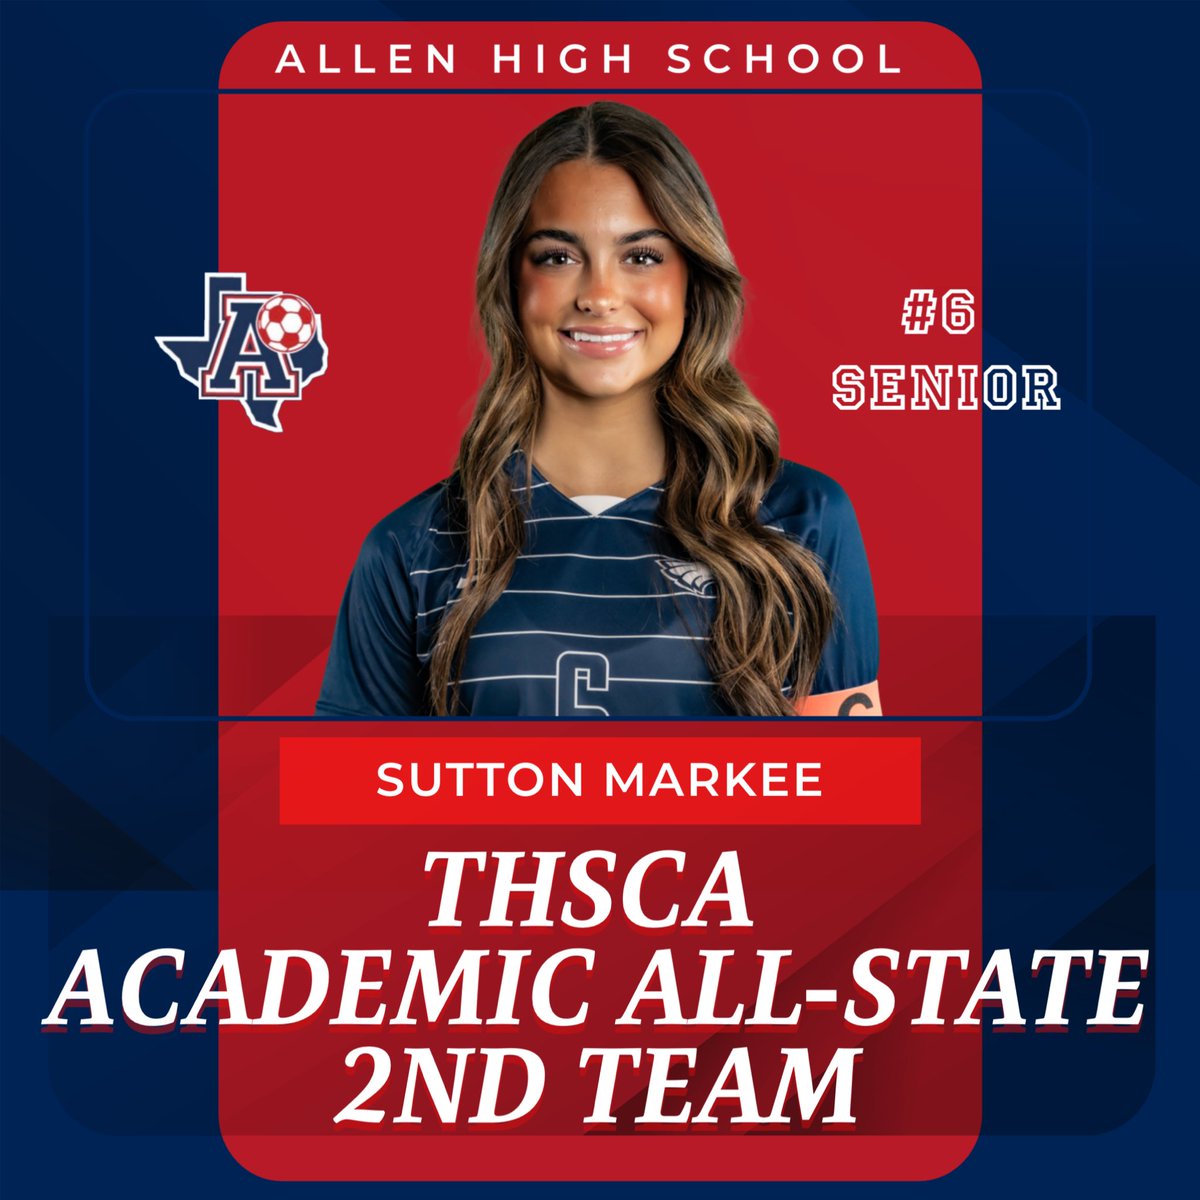 Congrats to our THSCA Academic All State Second Team players: Sr. Kylie Alcorn Sr. Kennedy Amberson Sr. Sutton Markee